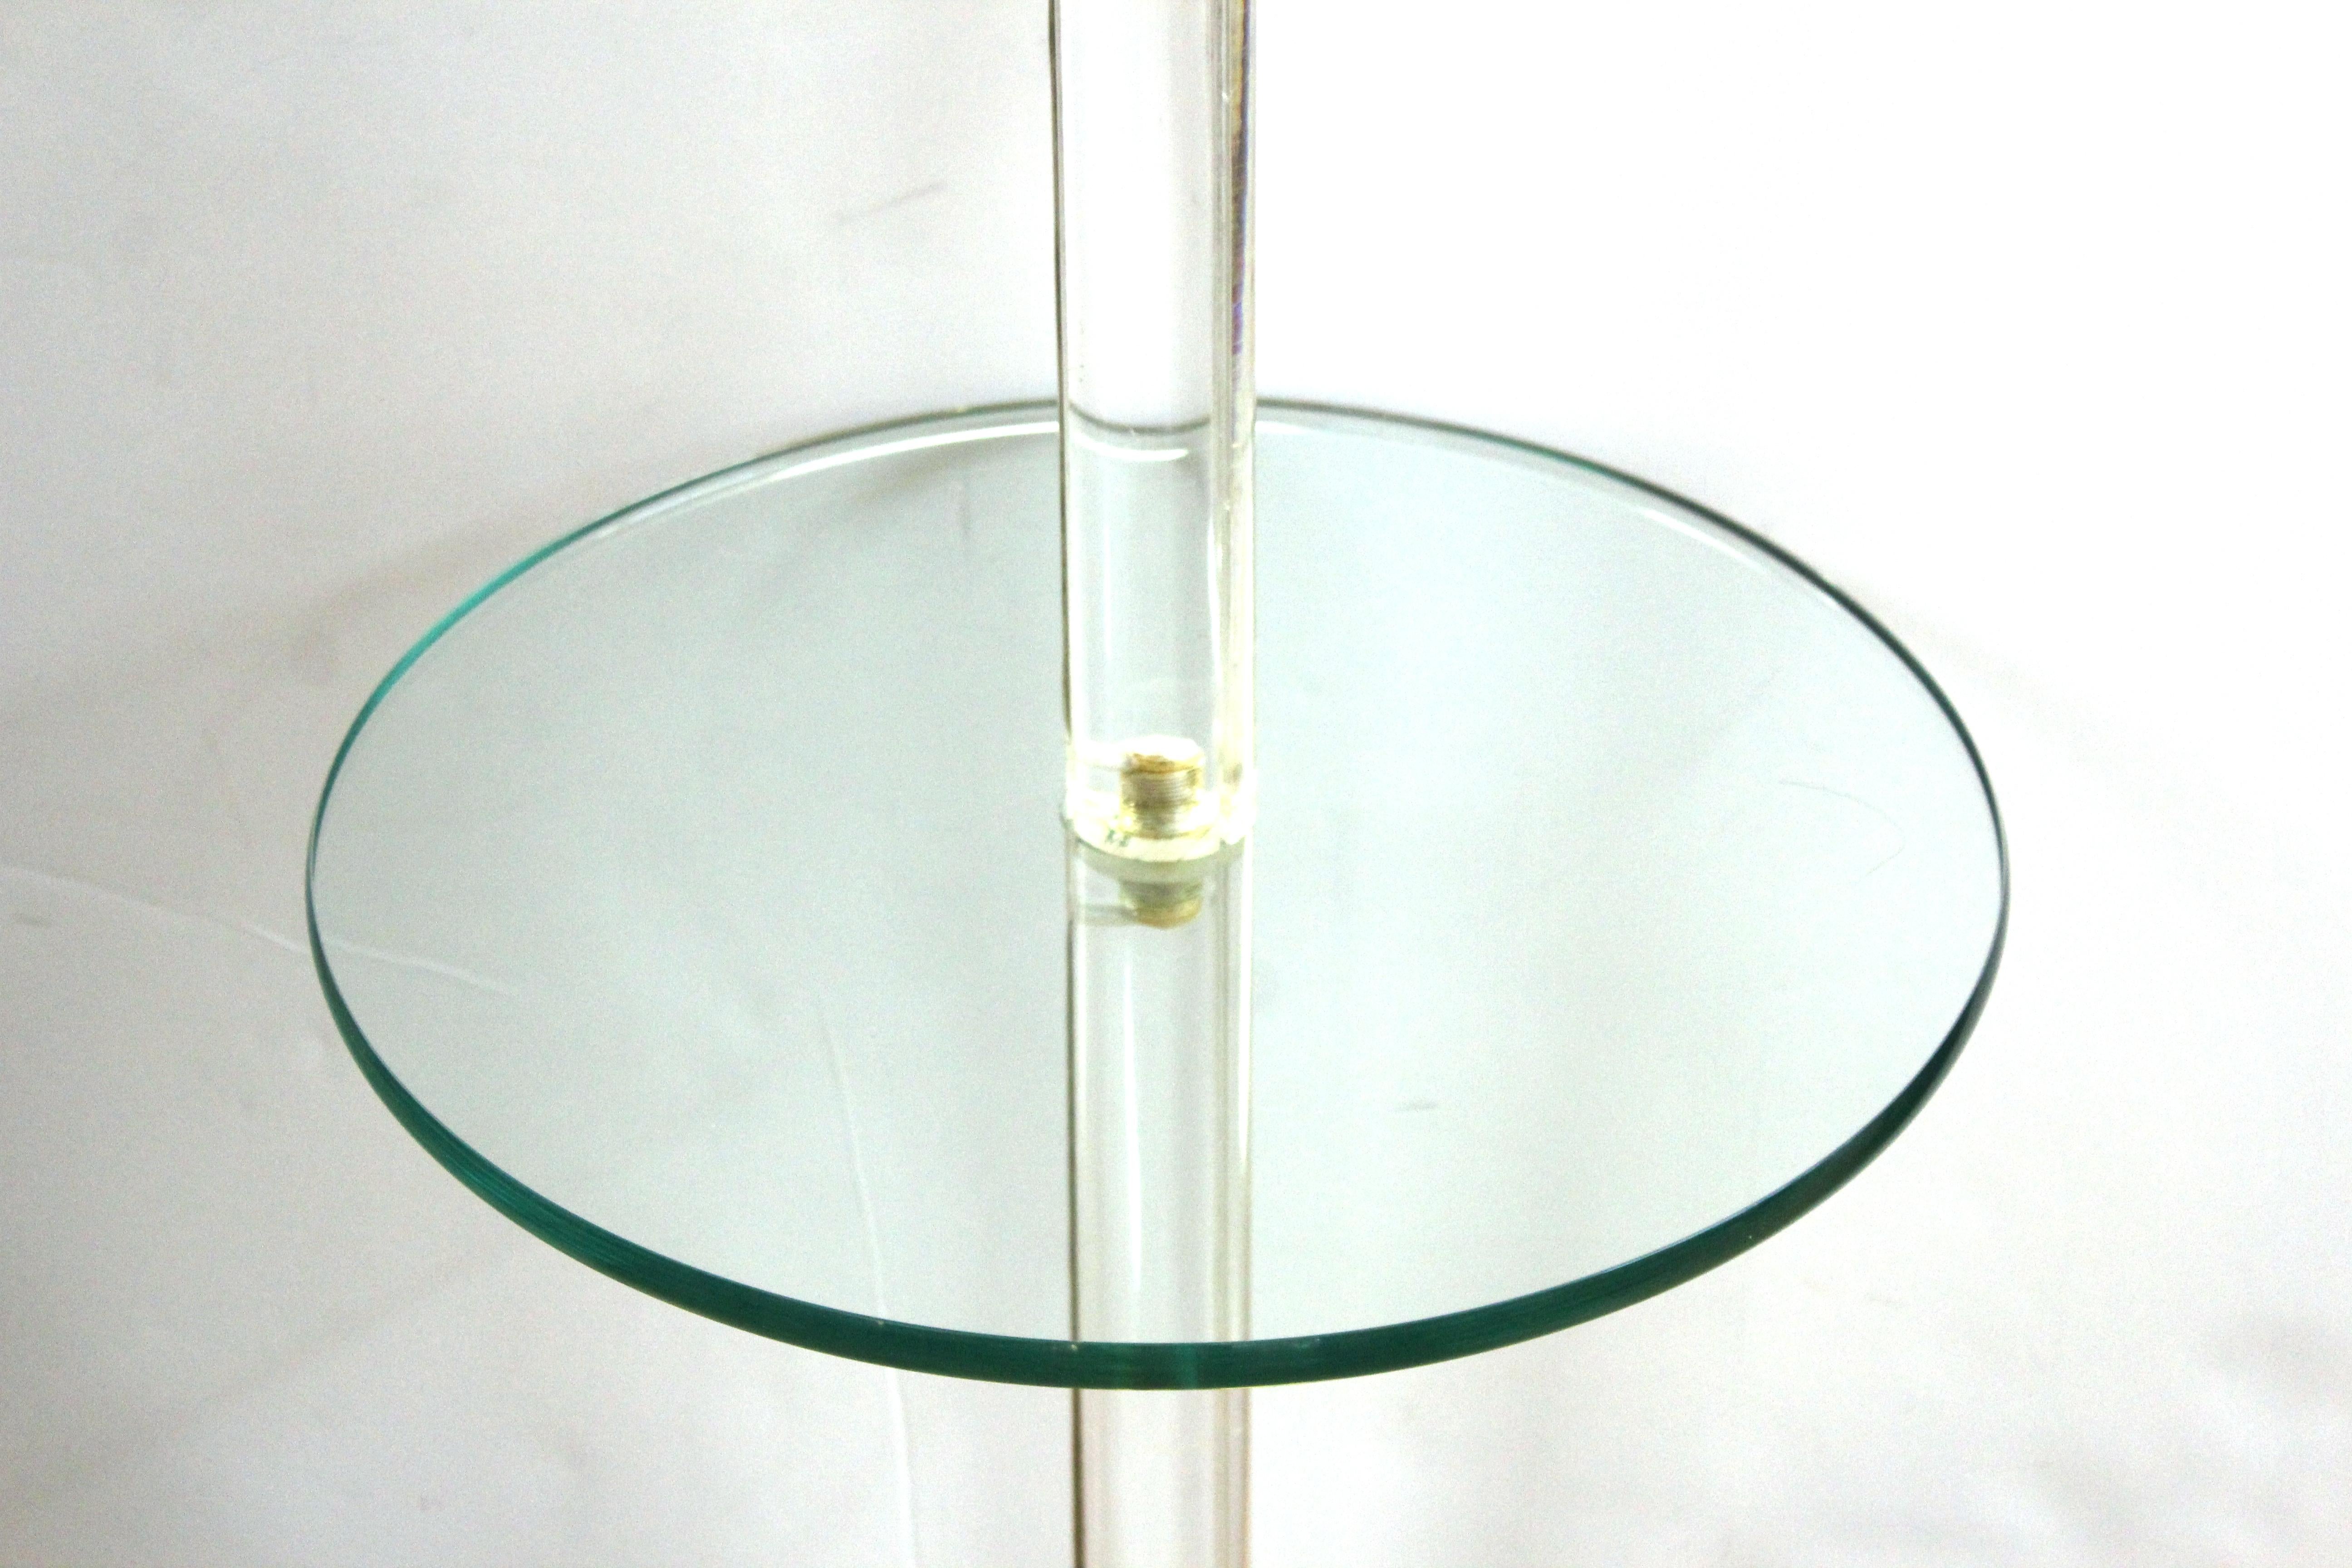 Modern floor lamp with Lucite stem and brass foot, with a circular glass surface mid-level acting as occasional or side table, attributed to Karl Springer. The Lucite has a slit for passing the cord, the upper part has a moving brass arm with two